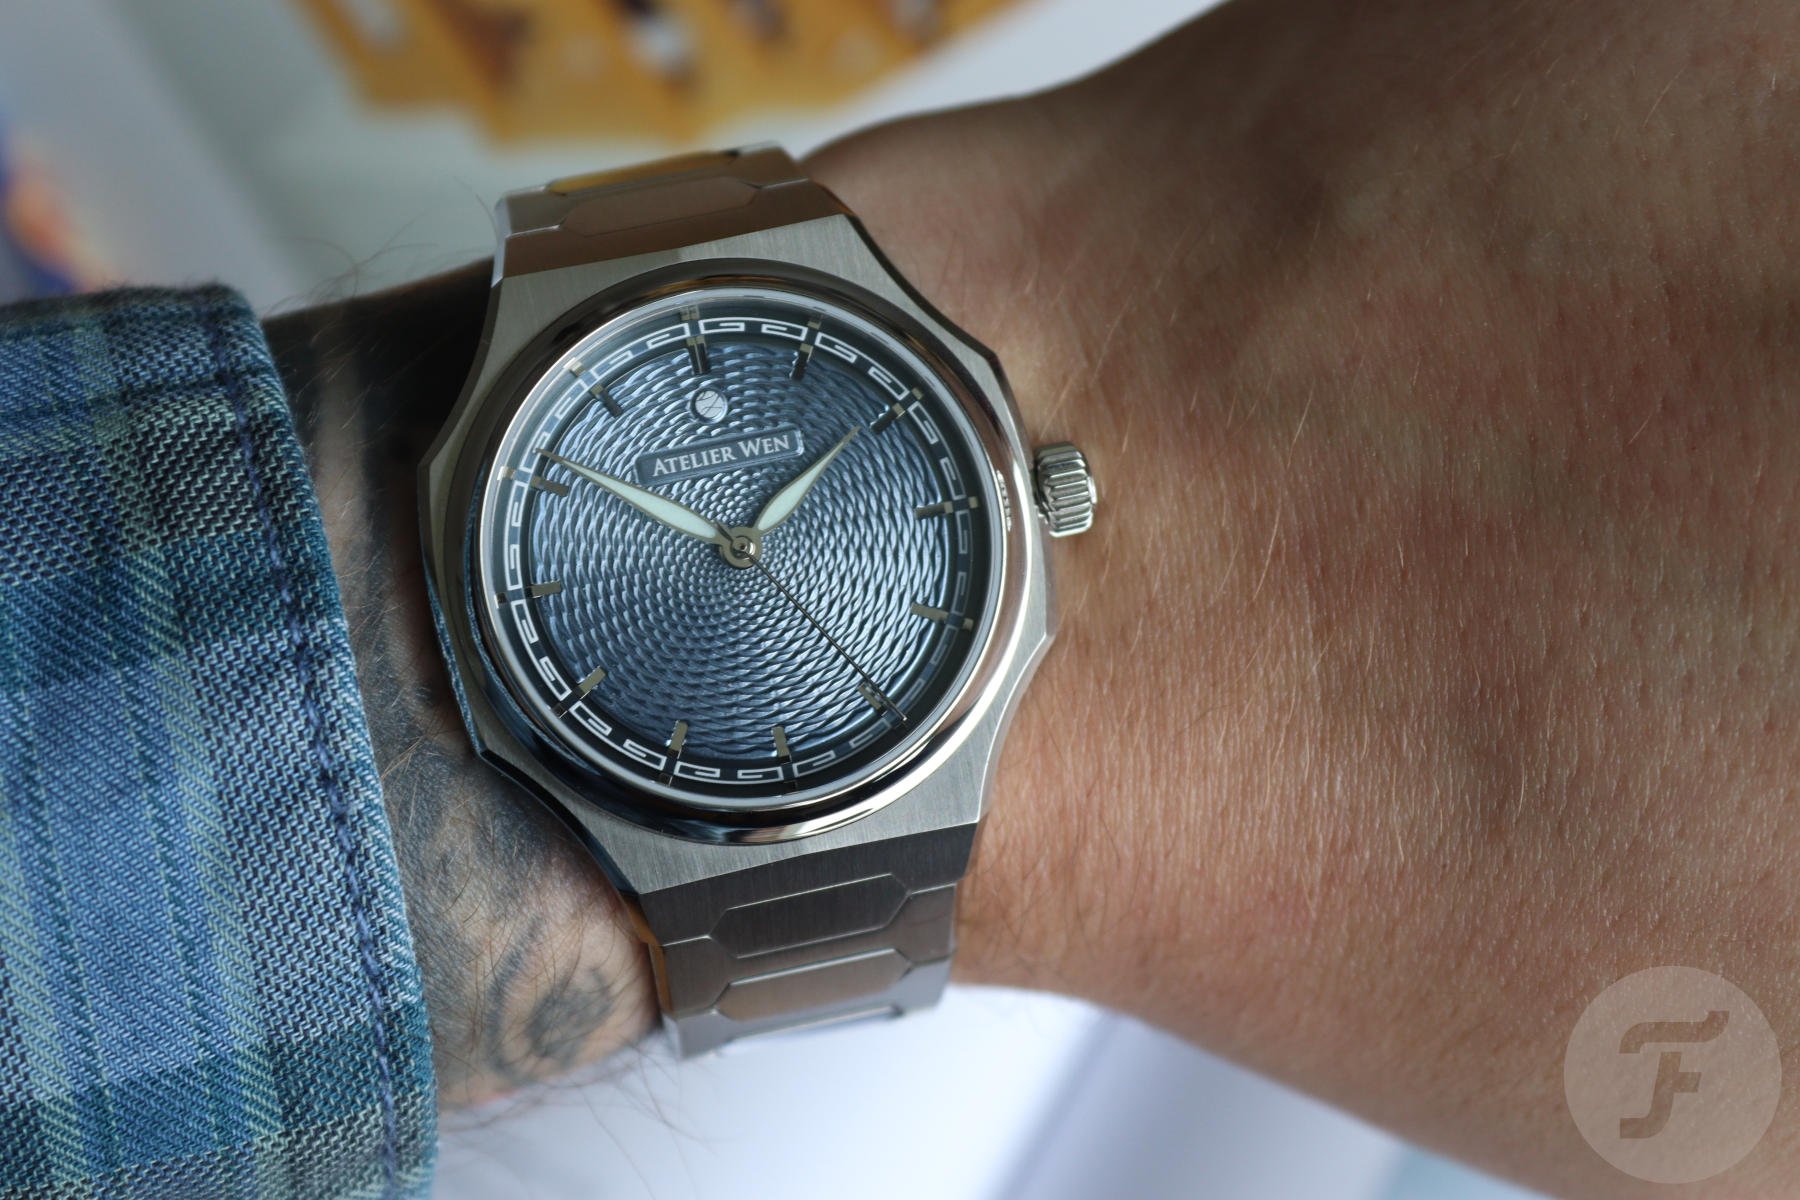 F】Hands-On Review: Atelier Wen Perception With Hand-Guilloché Dial